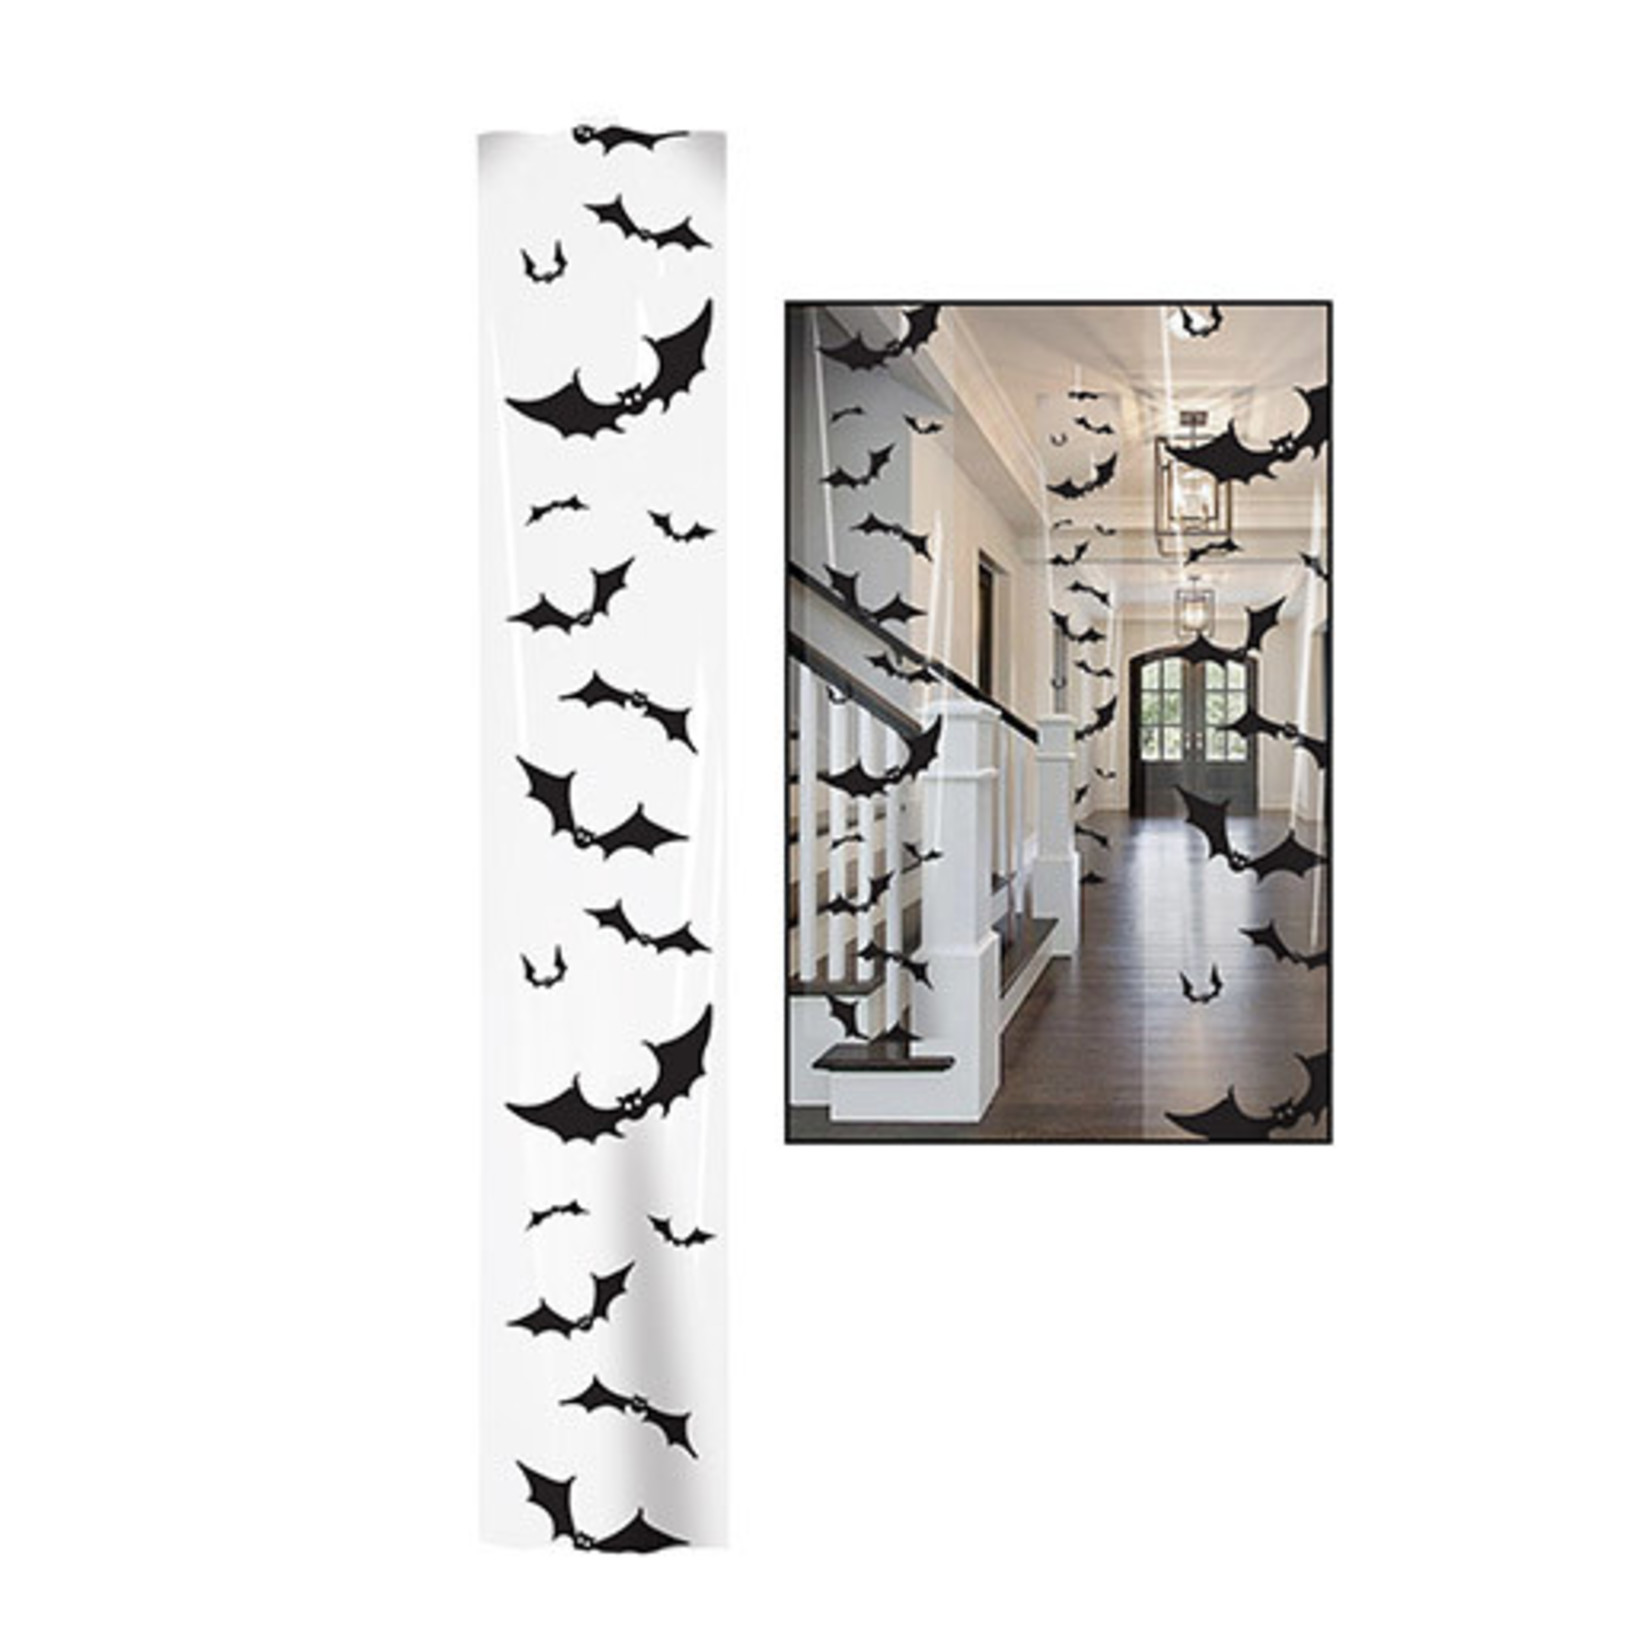 Beistle 6ft. Flying Bats Party Panels - 3ct.(12" x 6')